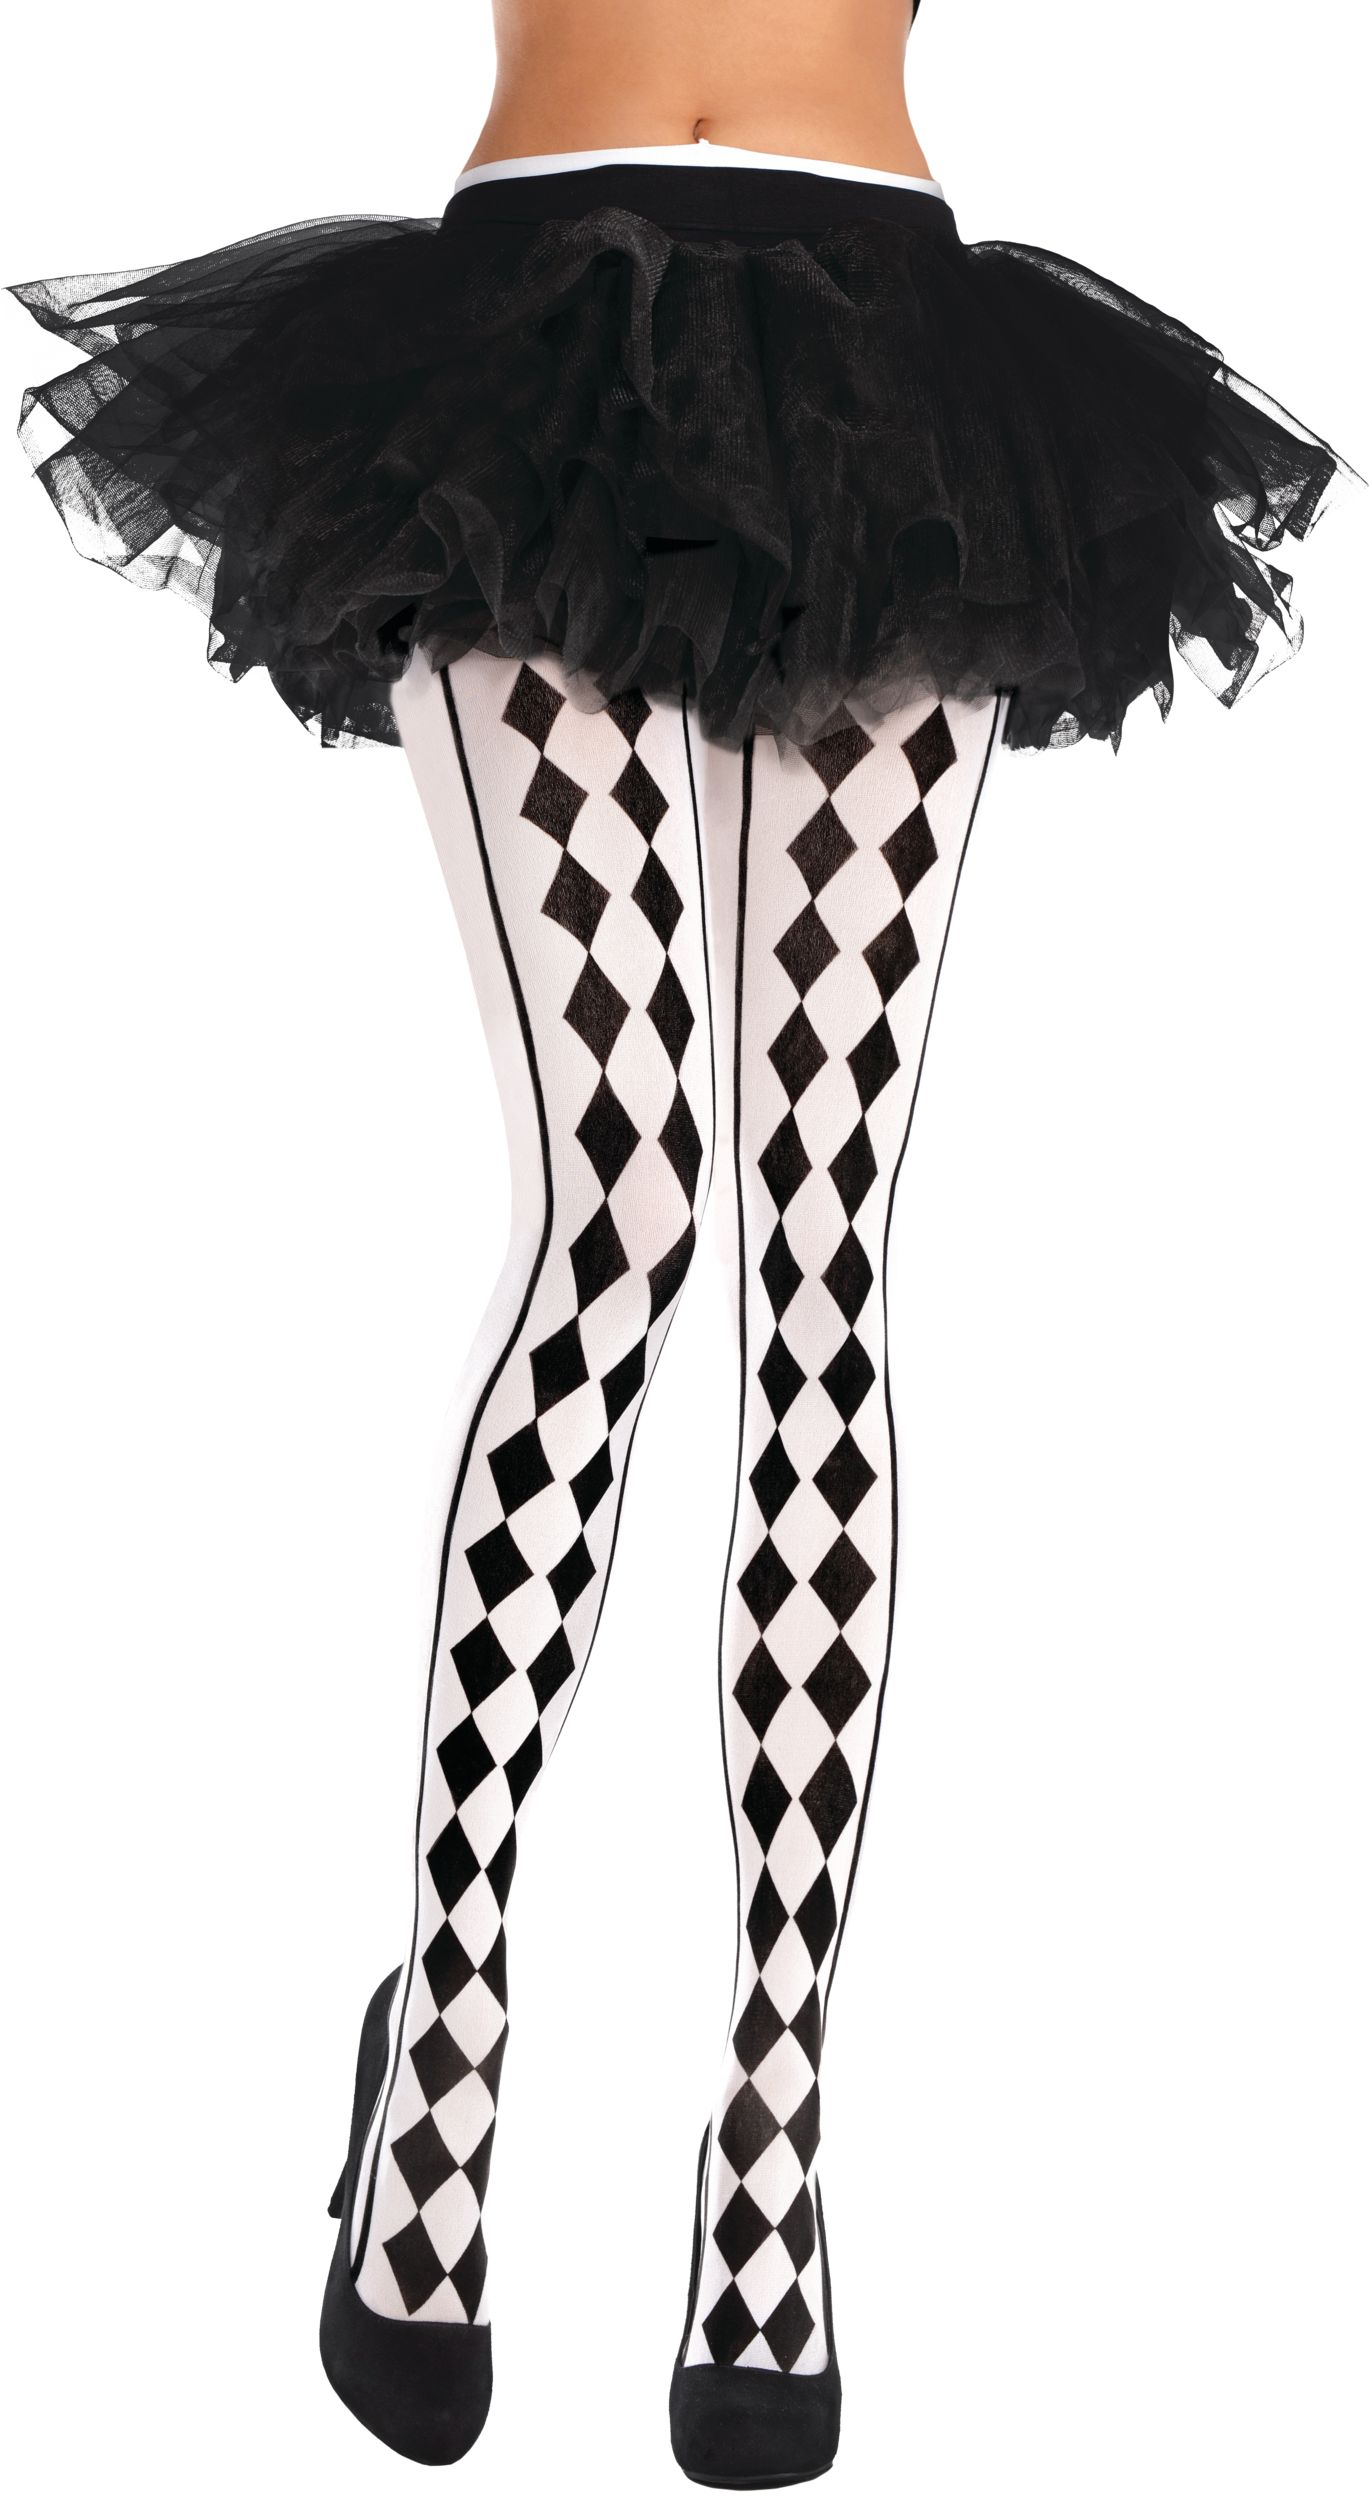 Adult DC Birds of Prey Harley Quinn Semi-Opaque Seamless Tights, Black/White  Diamond Print, One Size, Wearable Costume Accessory for Halloween